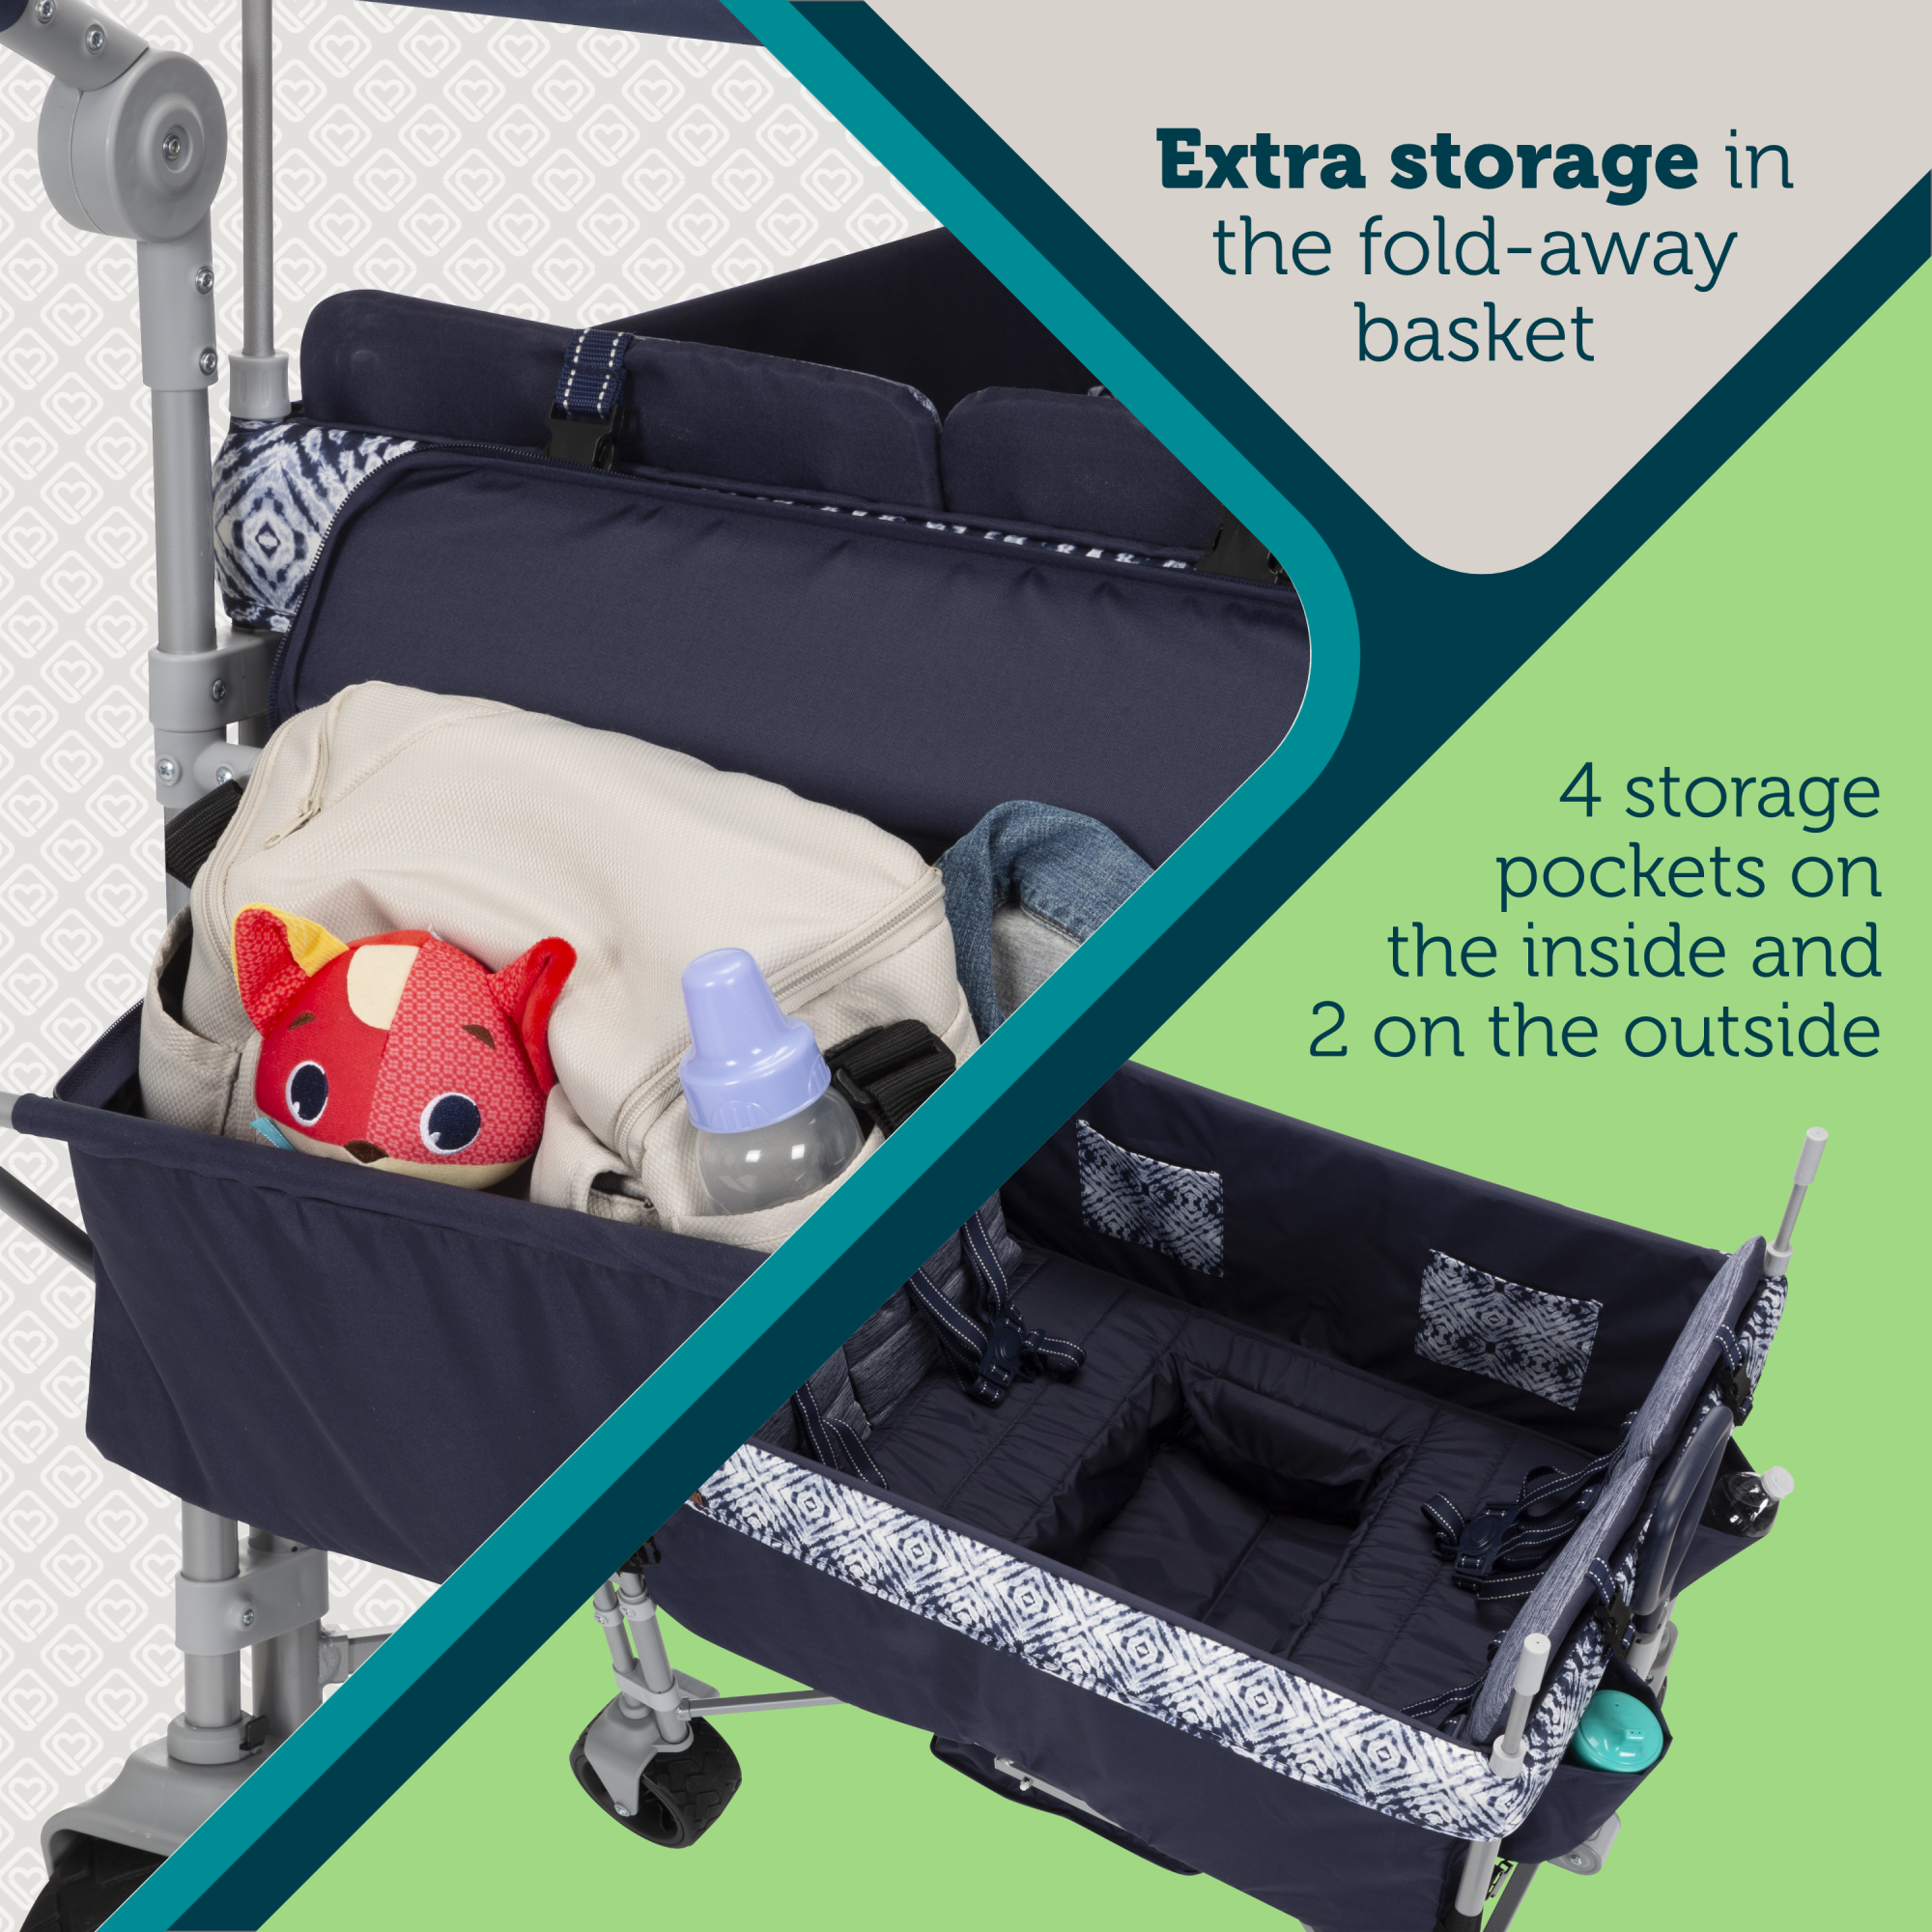 Summit Quad Wagon Stroller - extra storage in the fold-away basket - 4 storage pockets on the inside and 2 on the outside